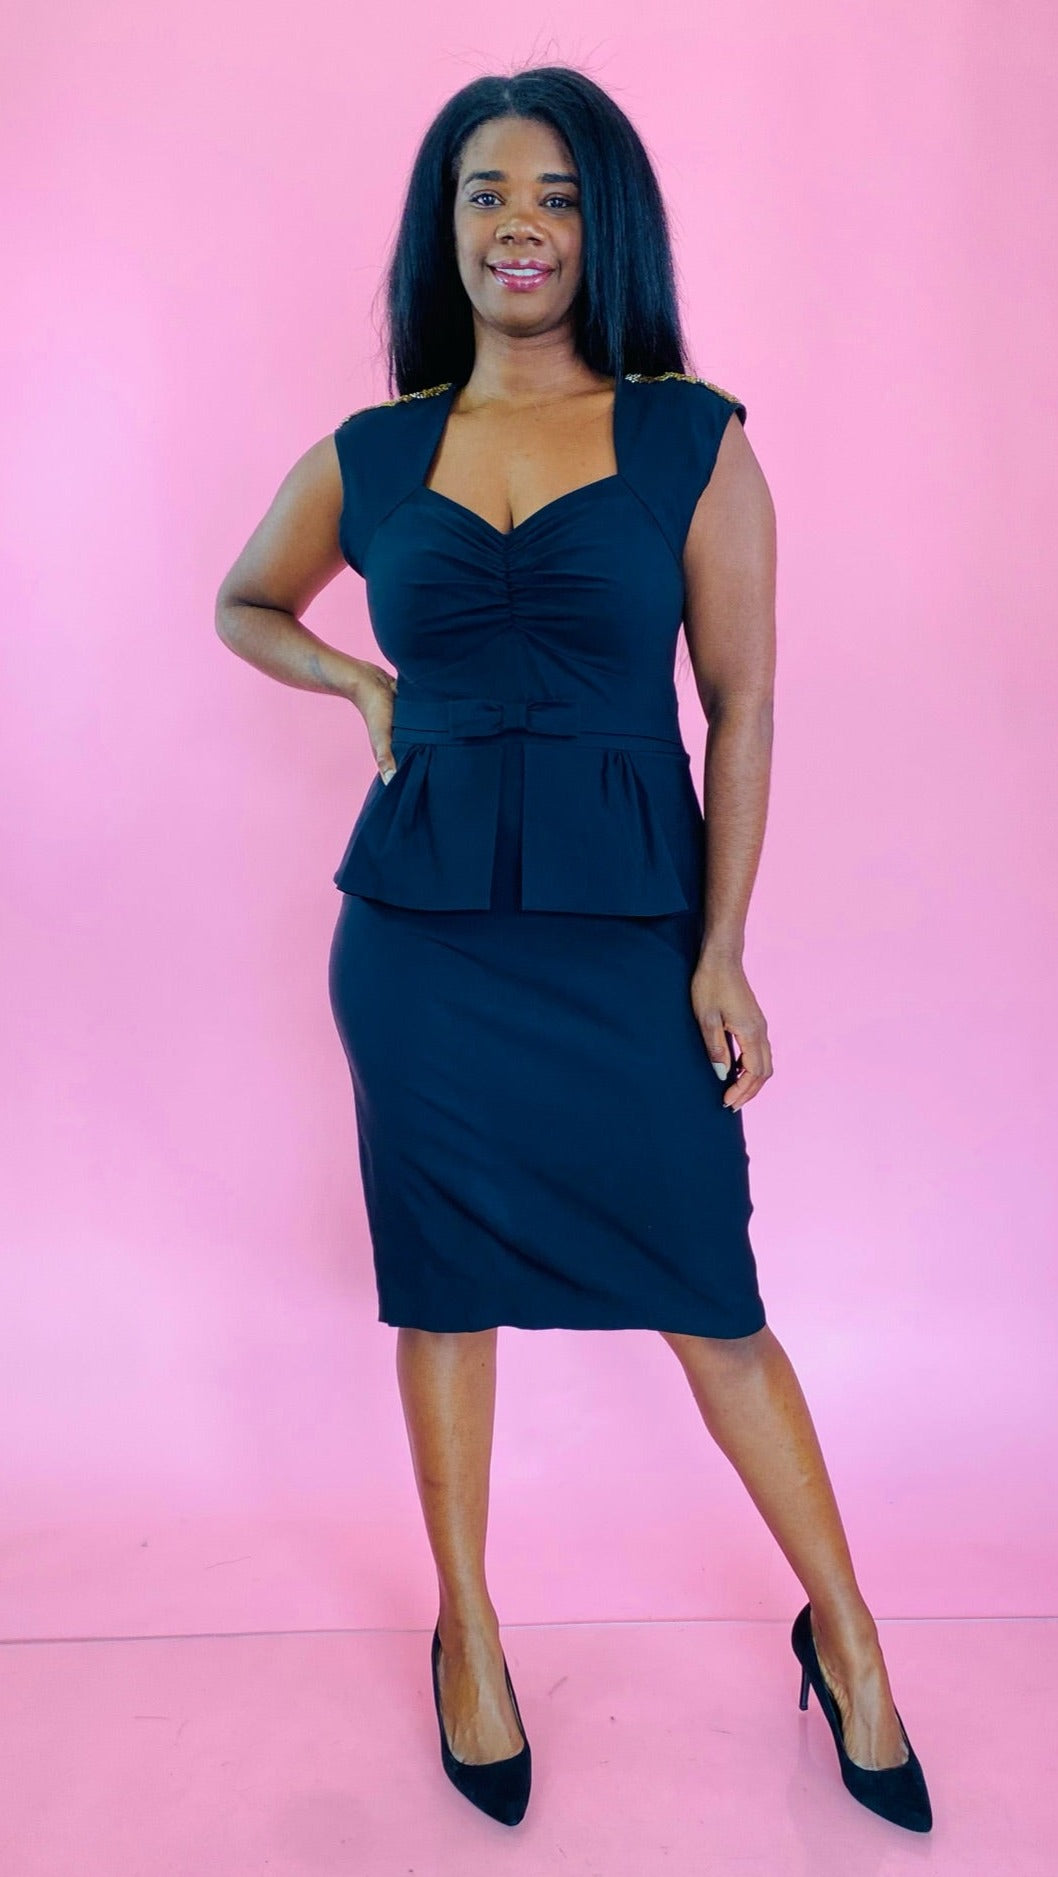 Full-body front view of a size 18 Stop Staring black peplum midi dress with square-sweetheart neckline, ruching at the bust, and a bow detail at the waist styled with black pumps on a size 10/12 model.